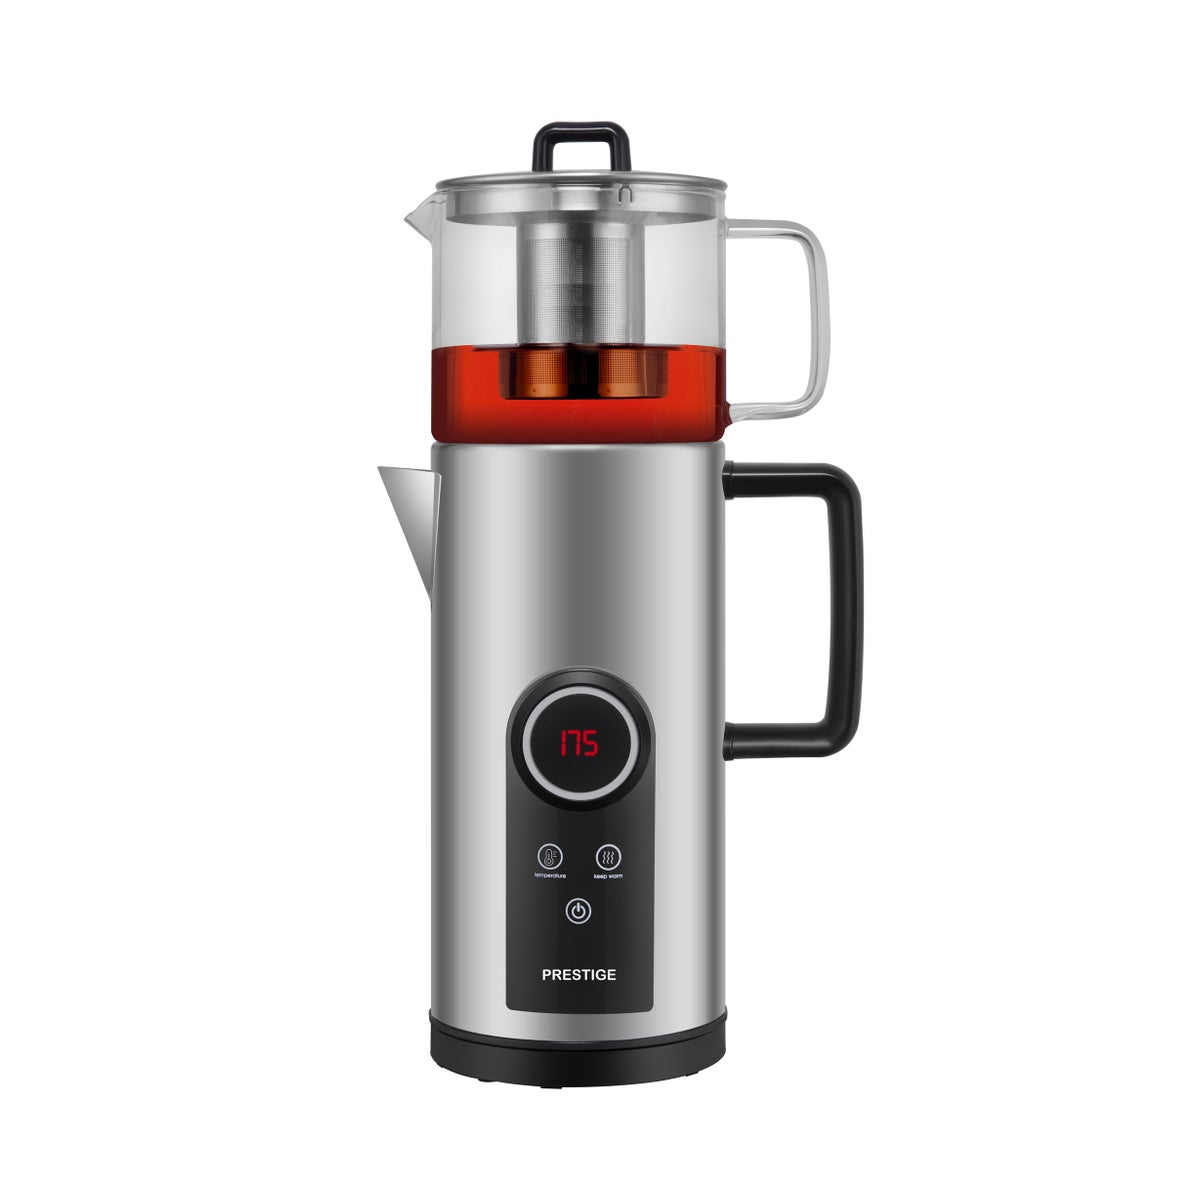 Electric Double Tea Kettle S/S 1.8L with 1L Glass Tea Pot. 1000W Keep Warm and Temperature Switch